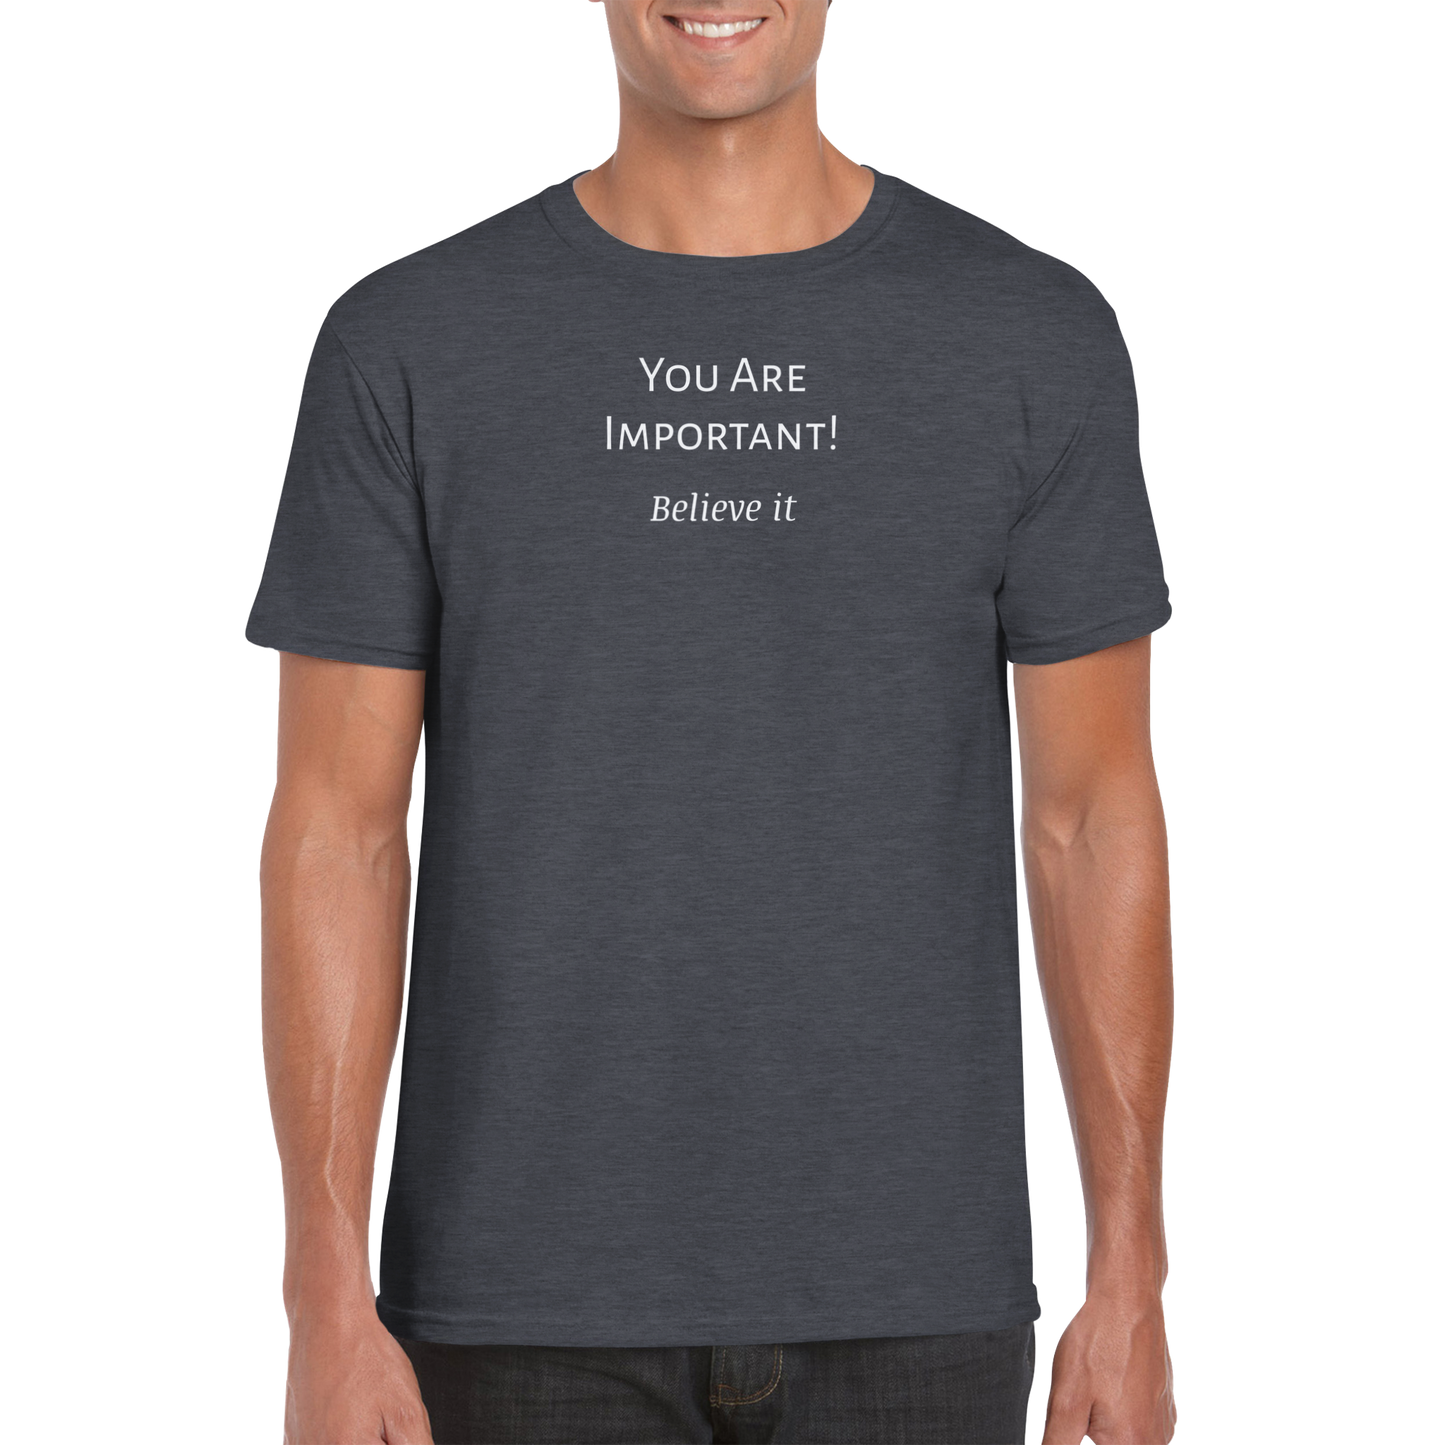 You Are Important! Classic Unisex Crewneck T-shirt. Wear it and share it forward